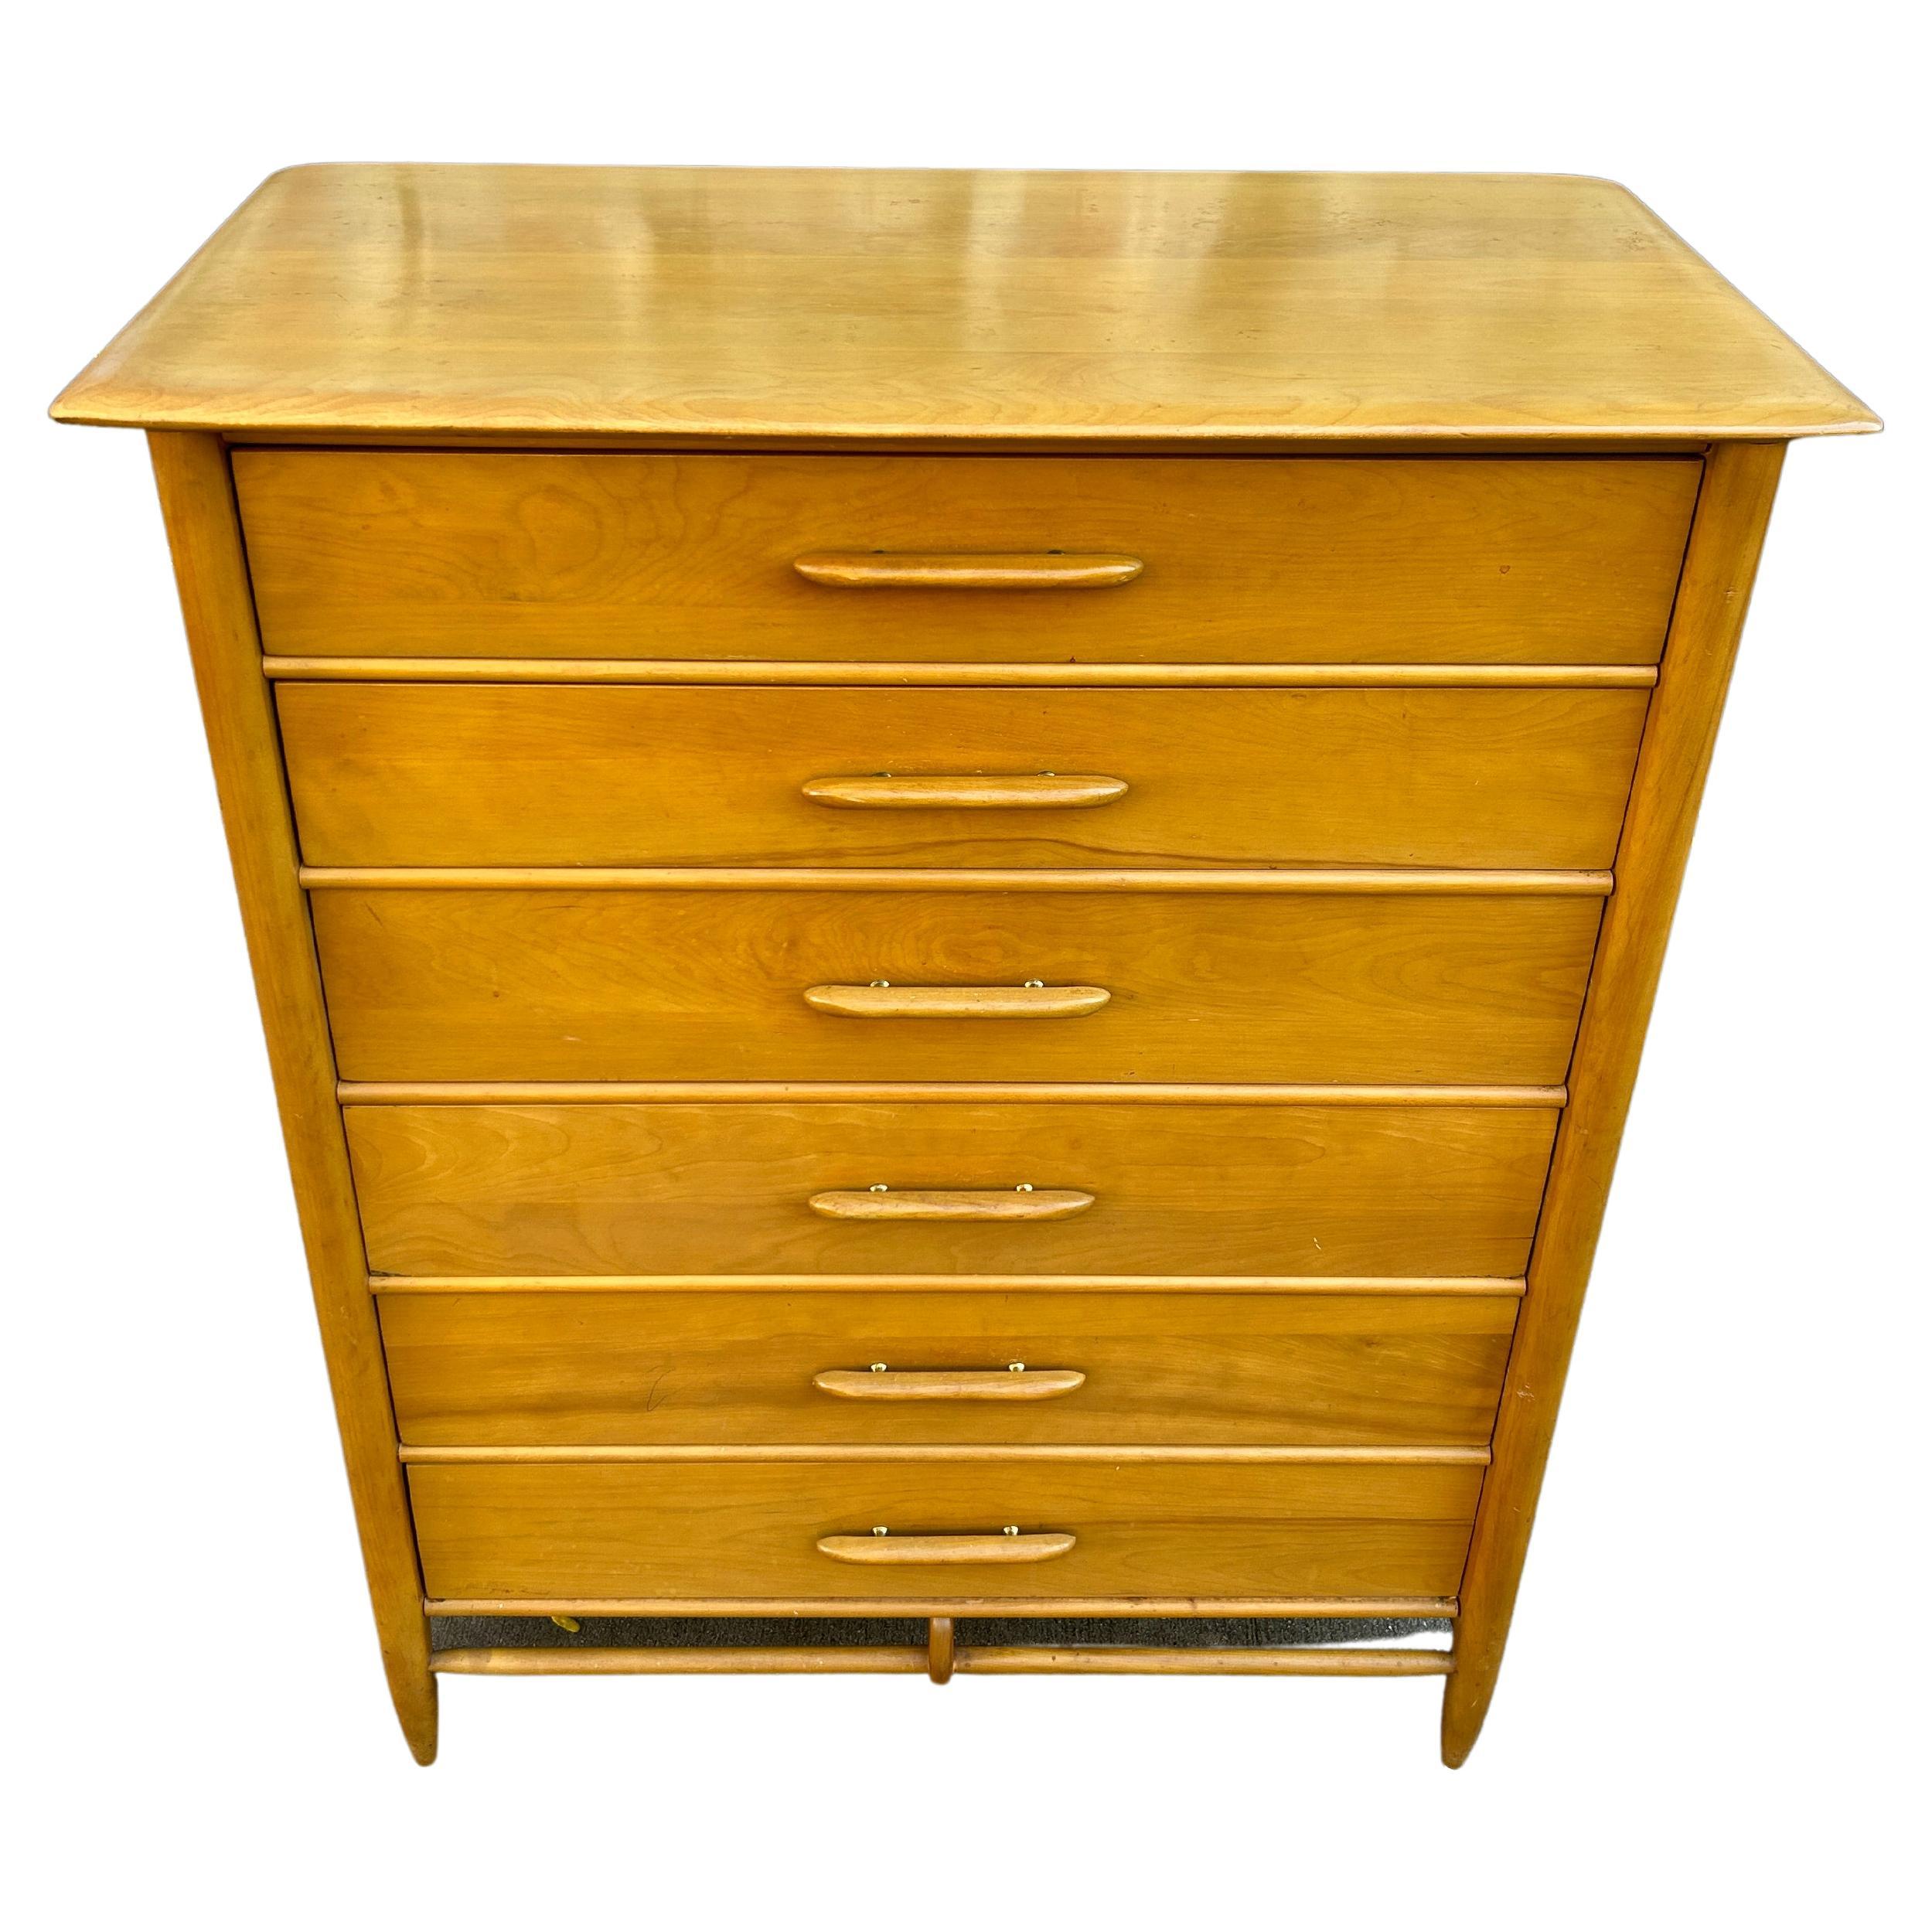 Mid century modern blonde solid maple tall 6 drawer dresser. Has curved details with tapered dowel upright legs. Carved maple handles with brass details. Solid maple drawers with dovetail joints. Nicely built mid century American modern American